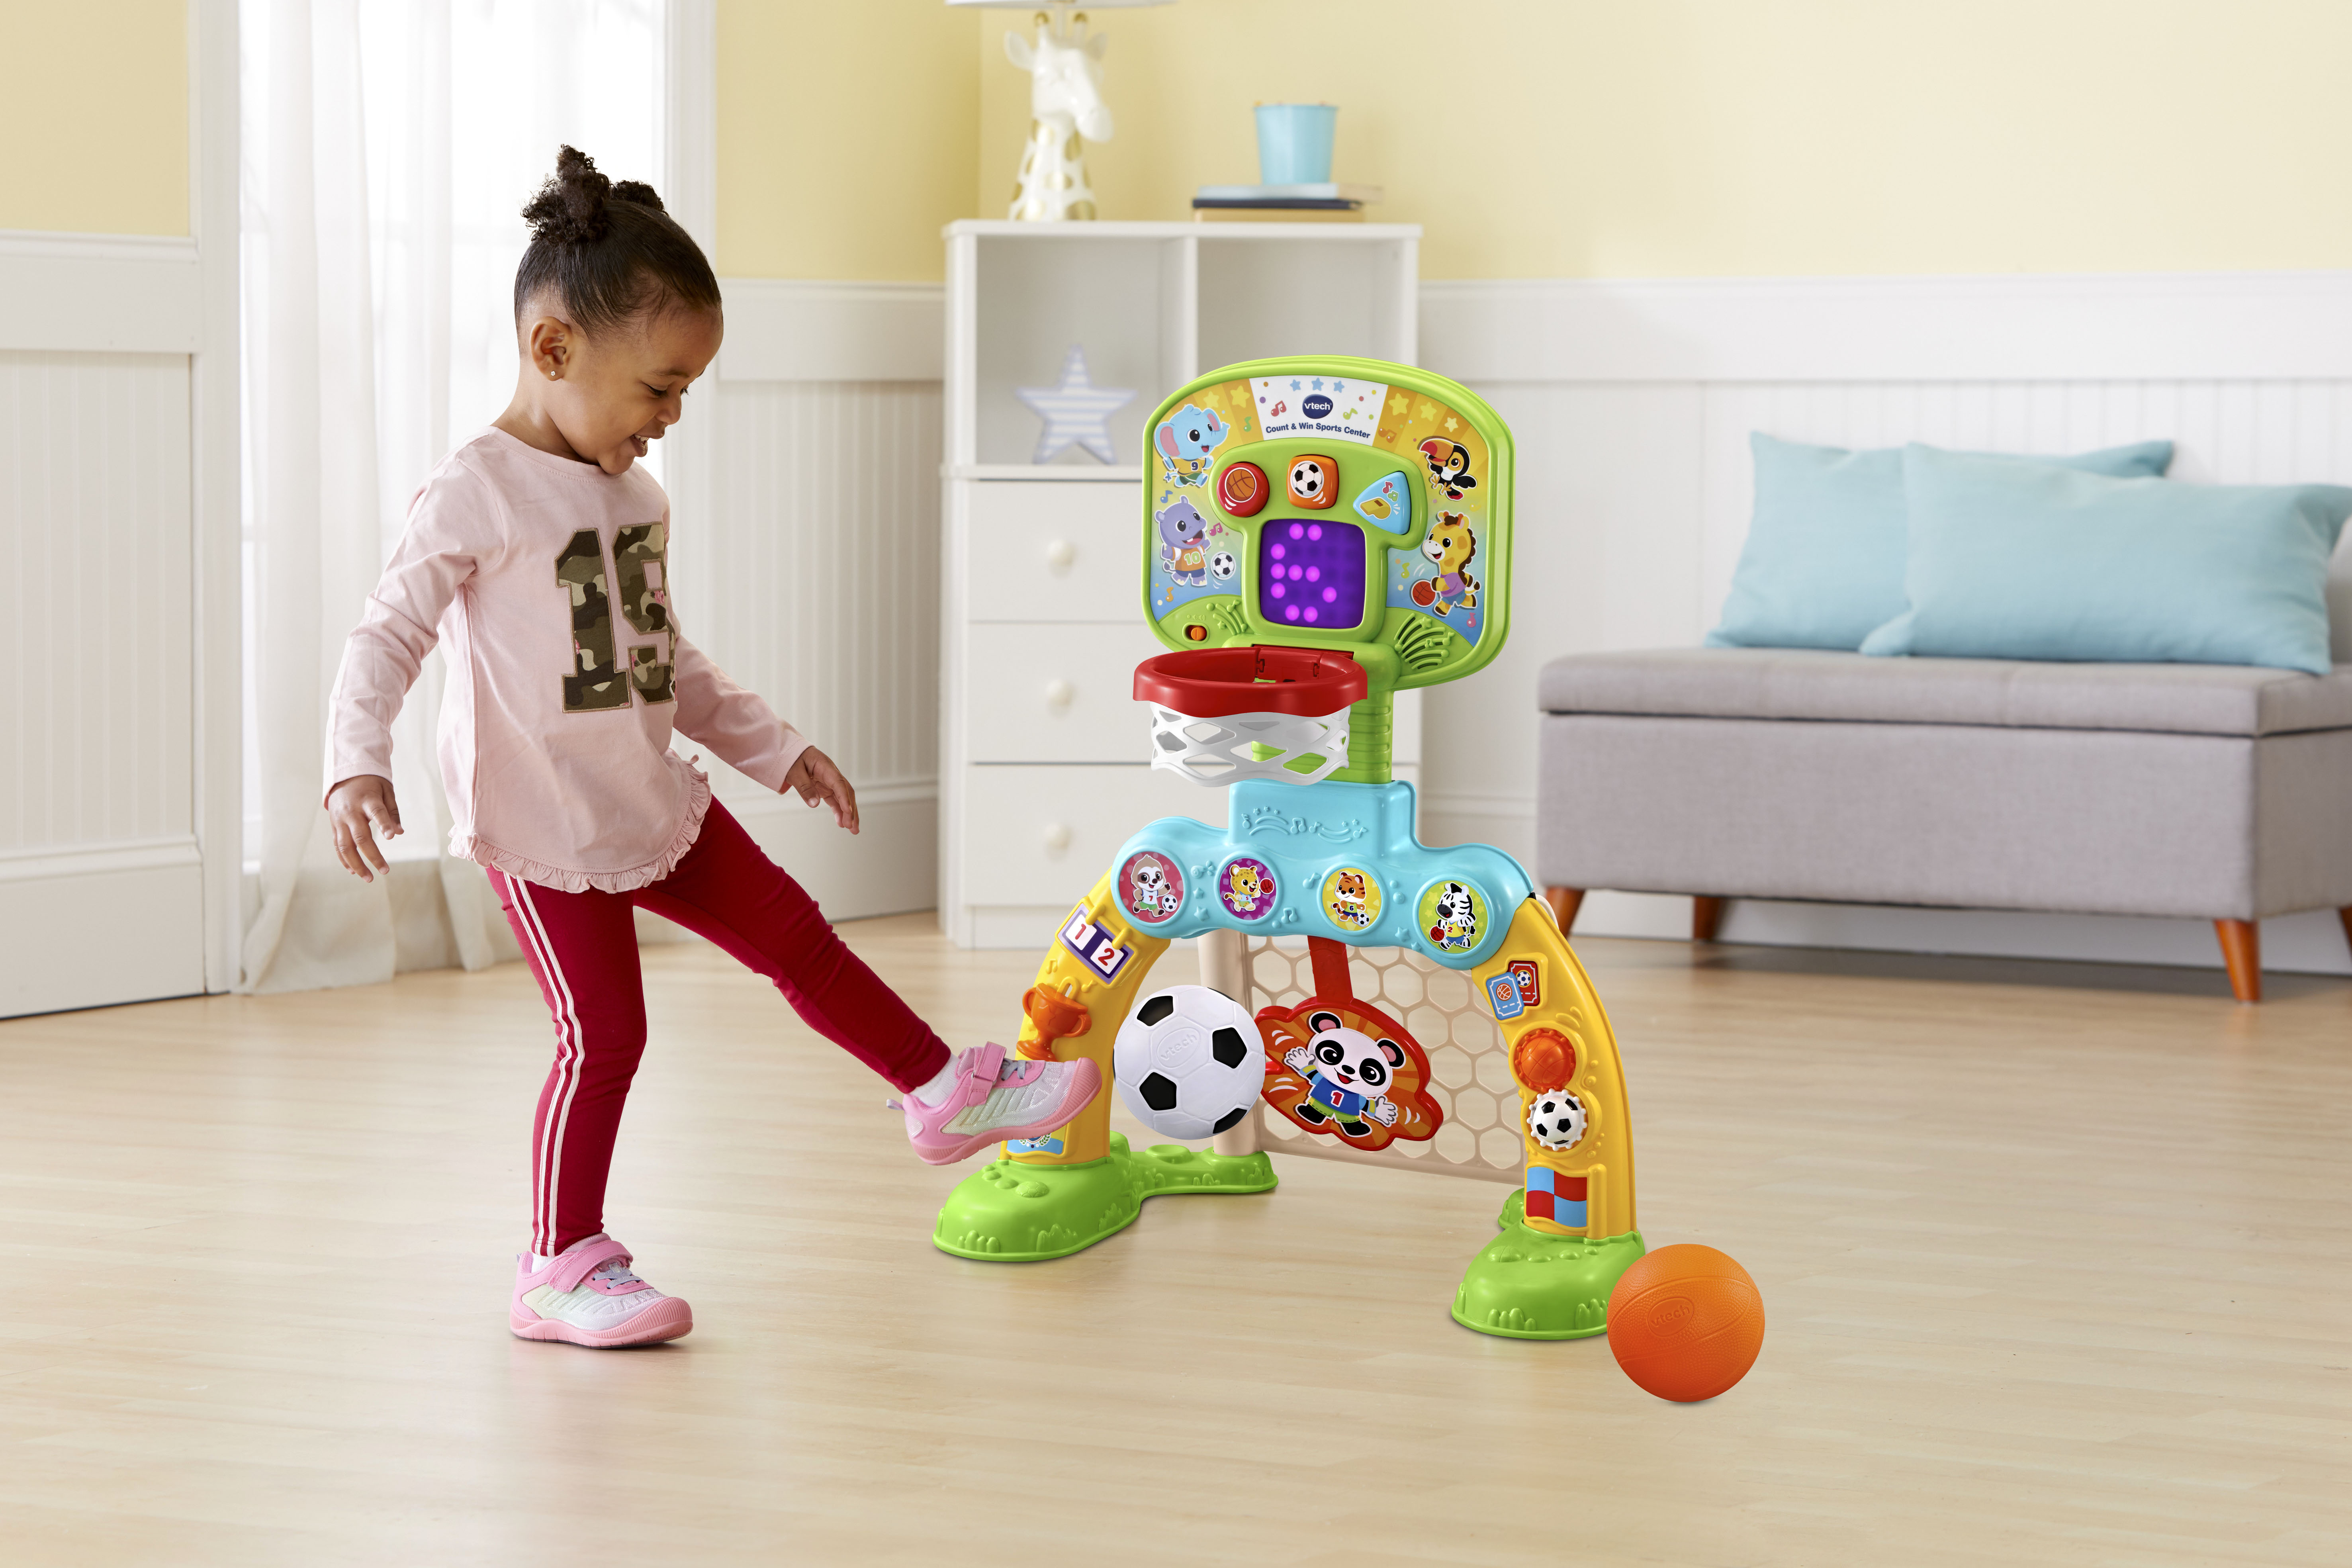 VTech Count & Win Sports Center, Basketball and Soccer Toy for Toddlers, Teaches Physical Activity - image 7 of 13